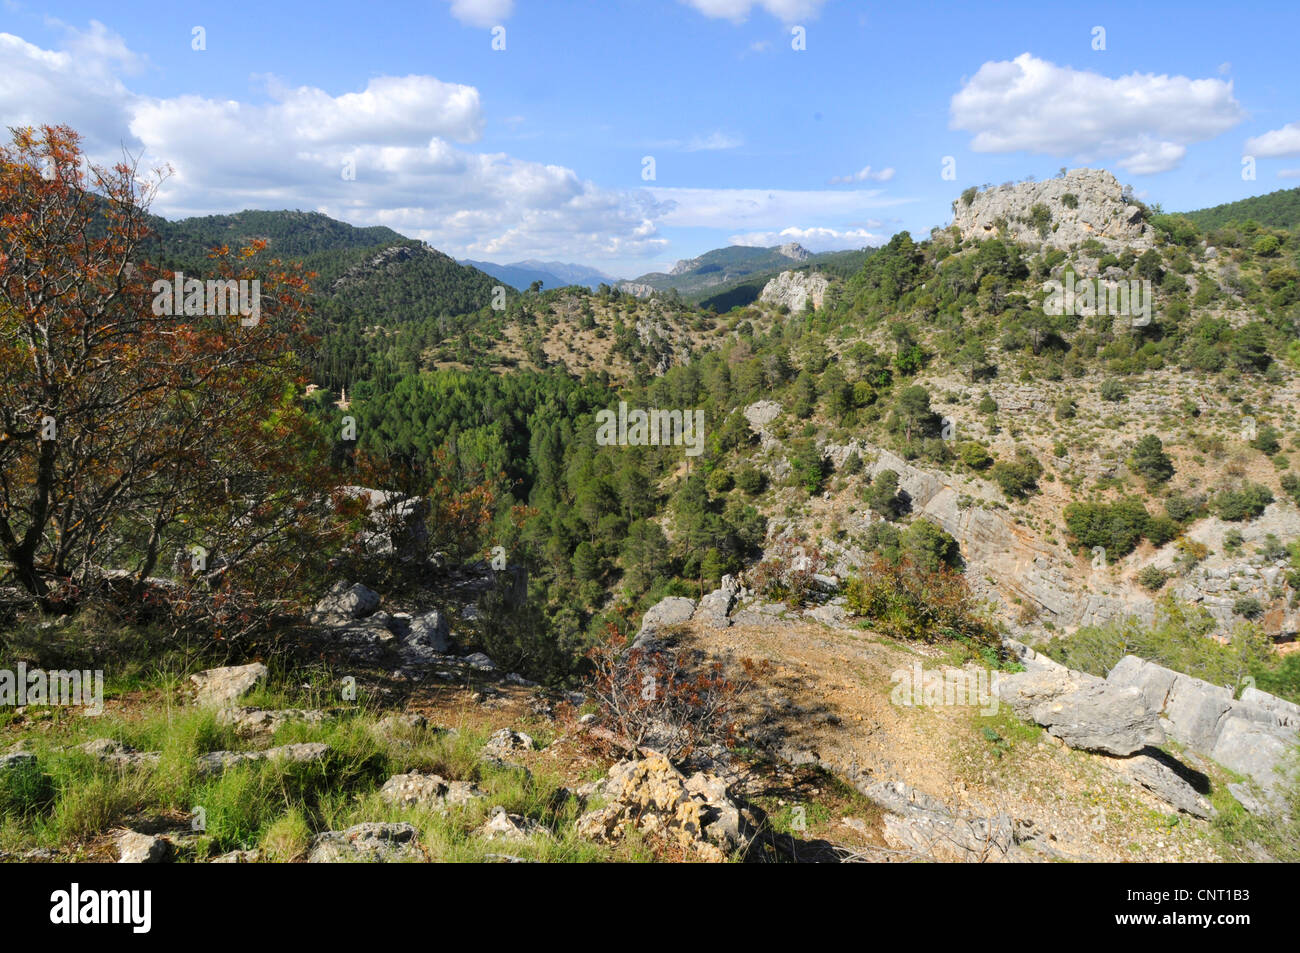 mountain landscape in the nature park Sierra de Cazorla, Spain, Andalusia, Naturpark Sierra de Cazorla Stock Photo